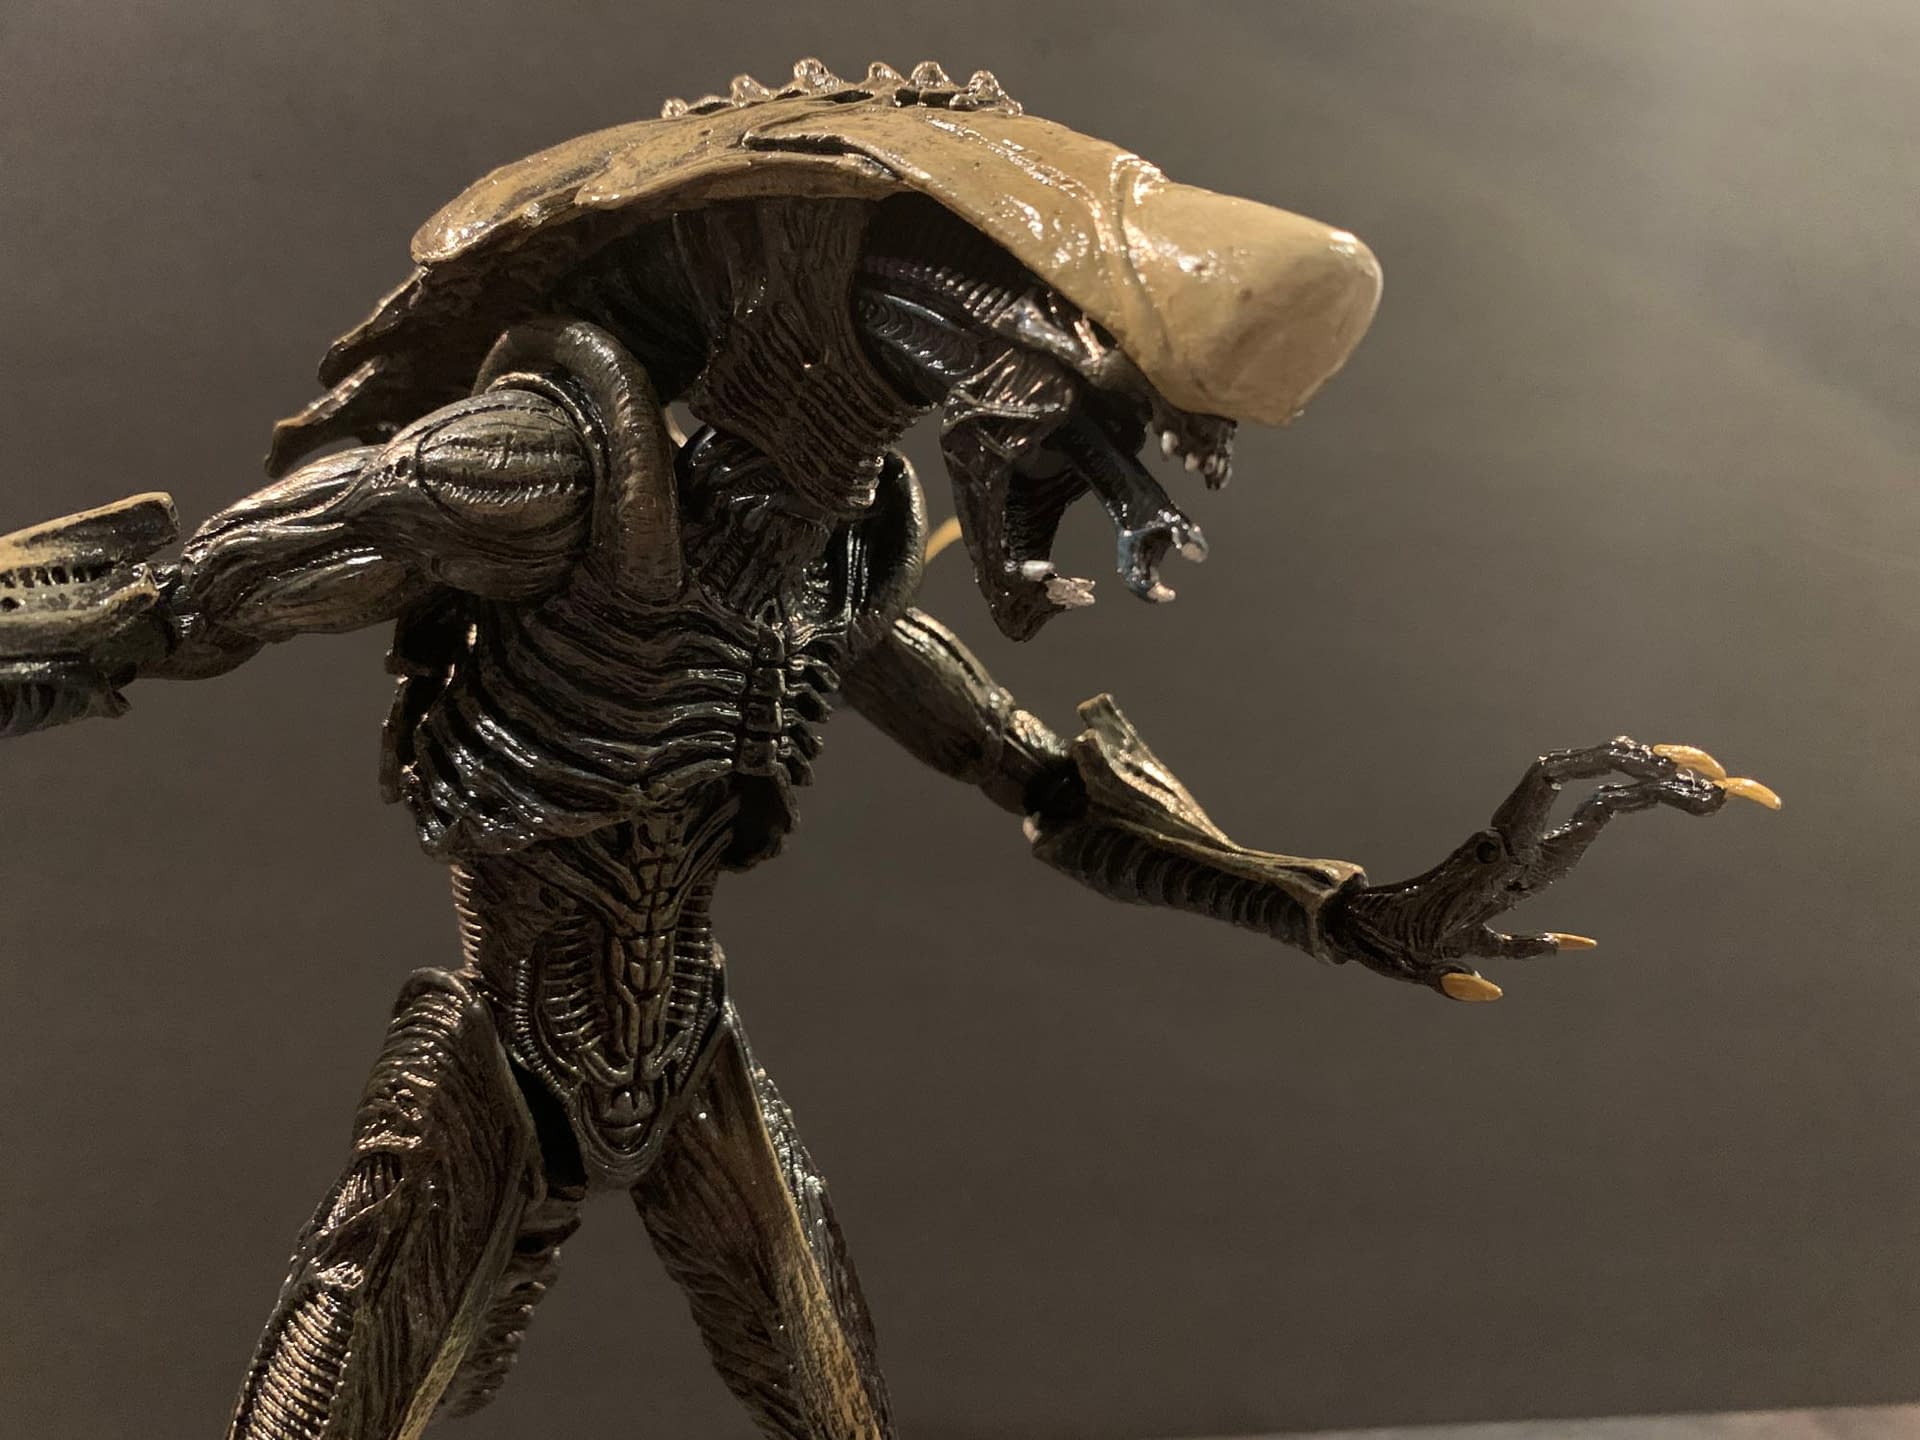 NECA's New Additions To Their Alien Line Are Unique